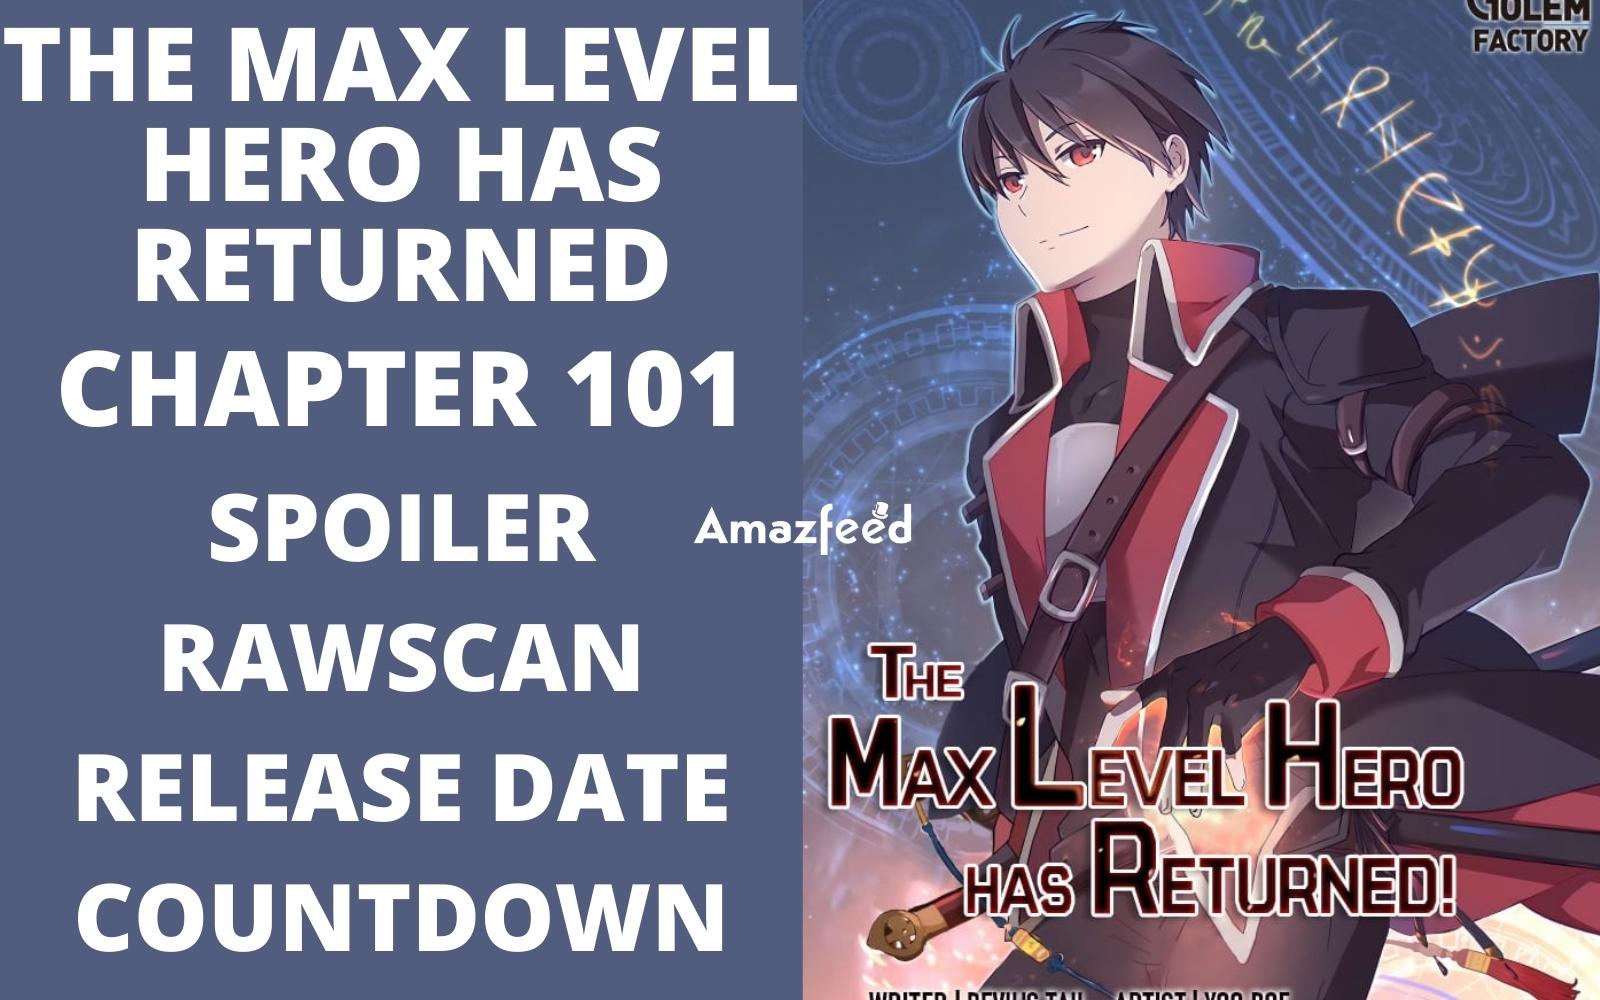 The Max Level Hero Has Returned Chapter 101 Spoiler, Release Date, Raw Scan, Countdown, Color Page